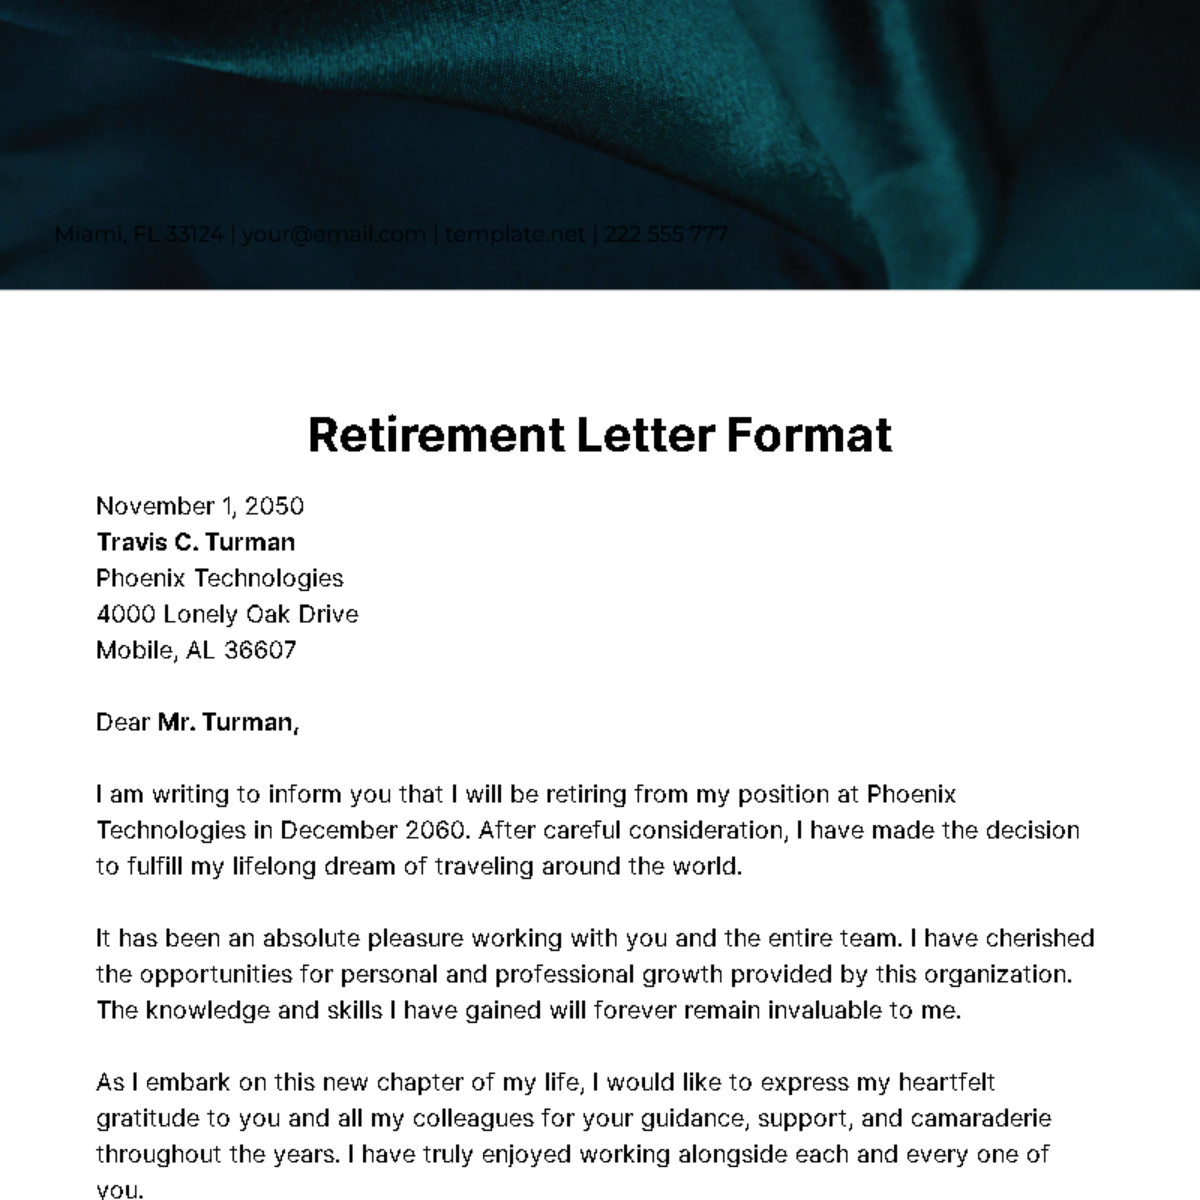 Free Retirement Letter Format Template